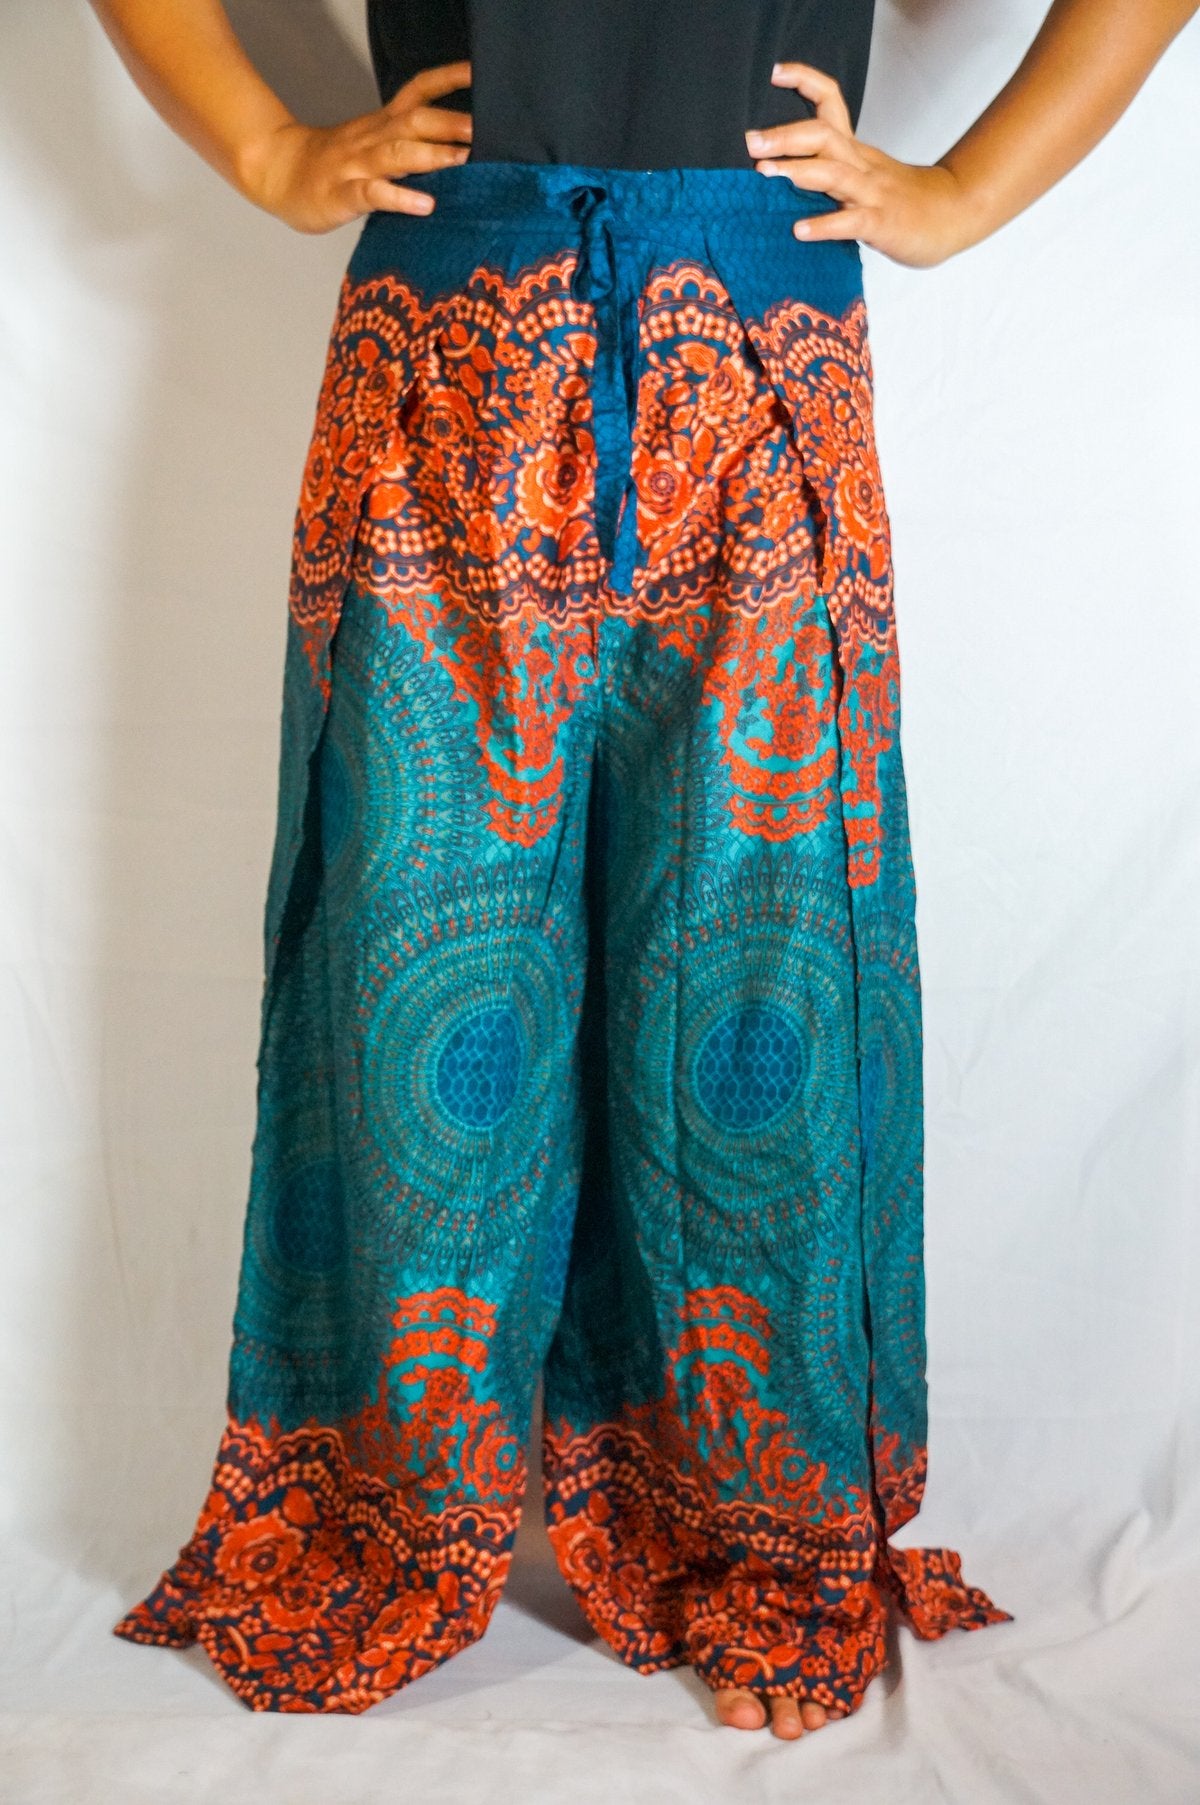 Hippie Pants Women Bright Teal Harem Pants Boho Trousers Small to